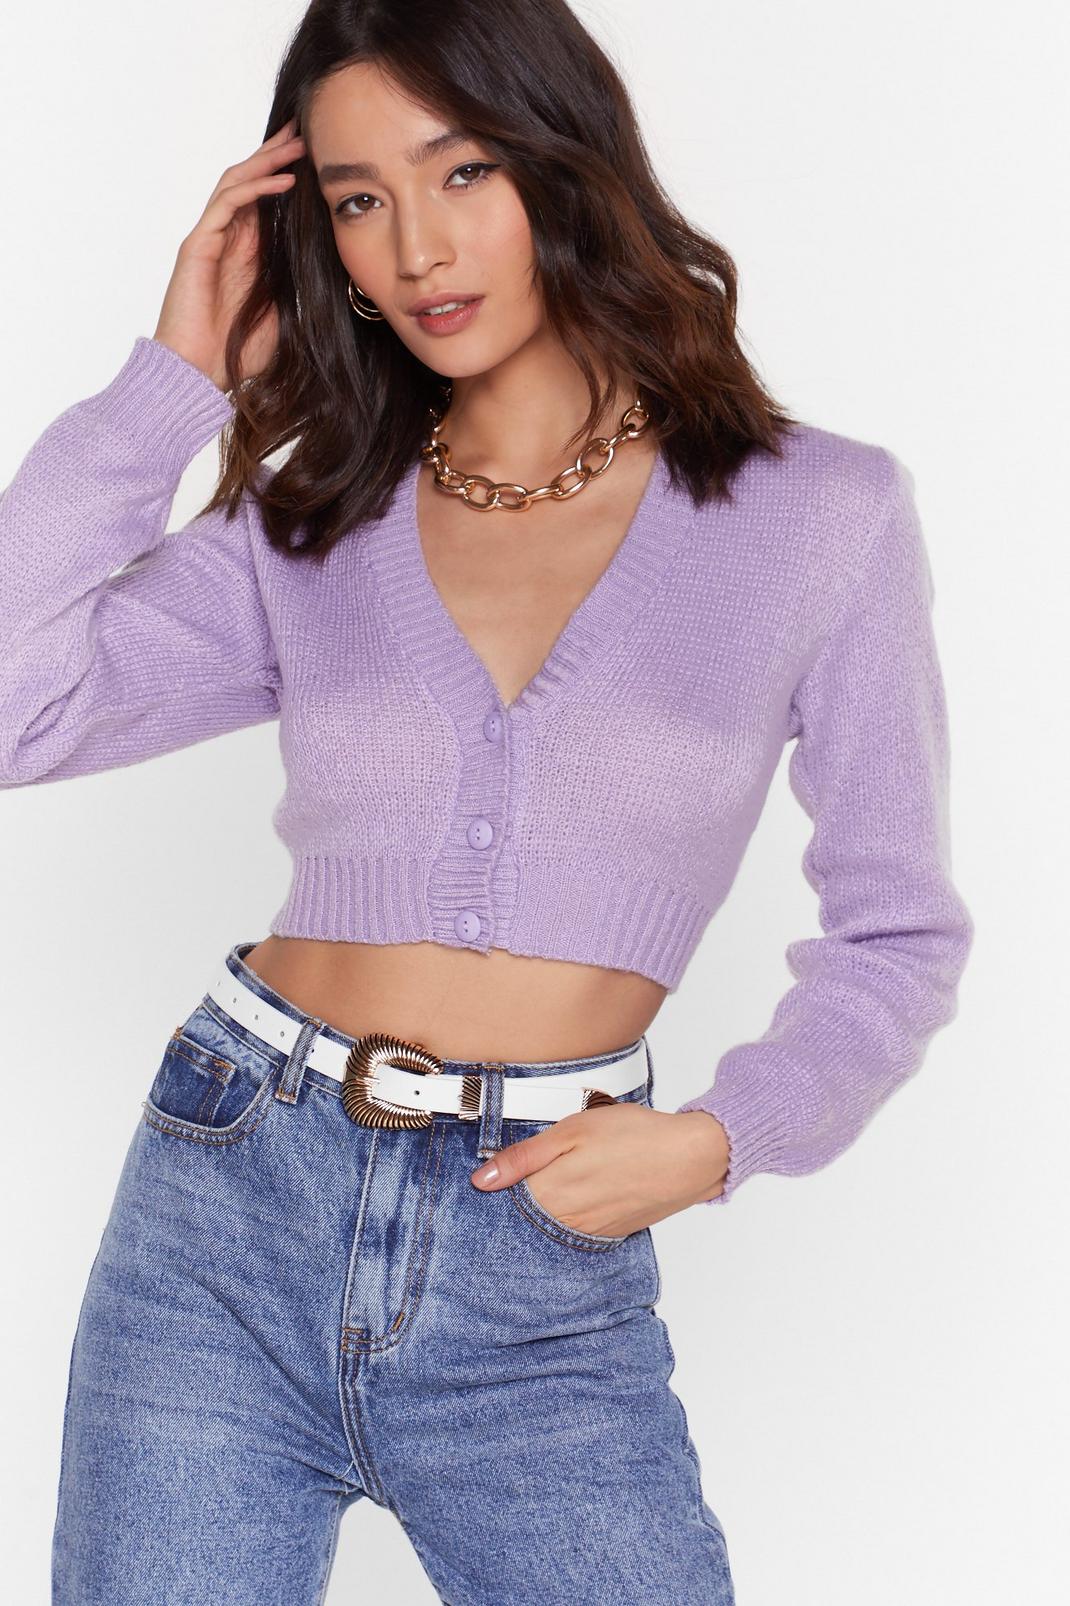 Cropped Cardigan 1 60+ Fashionable '90s Ladies Outfit Ideas That Come Back - 51